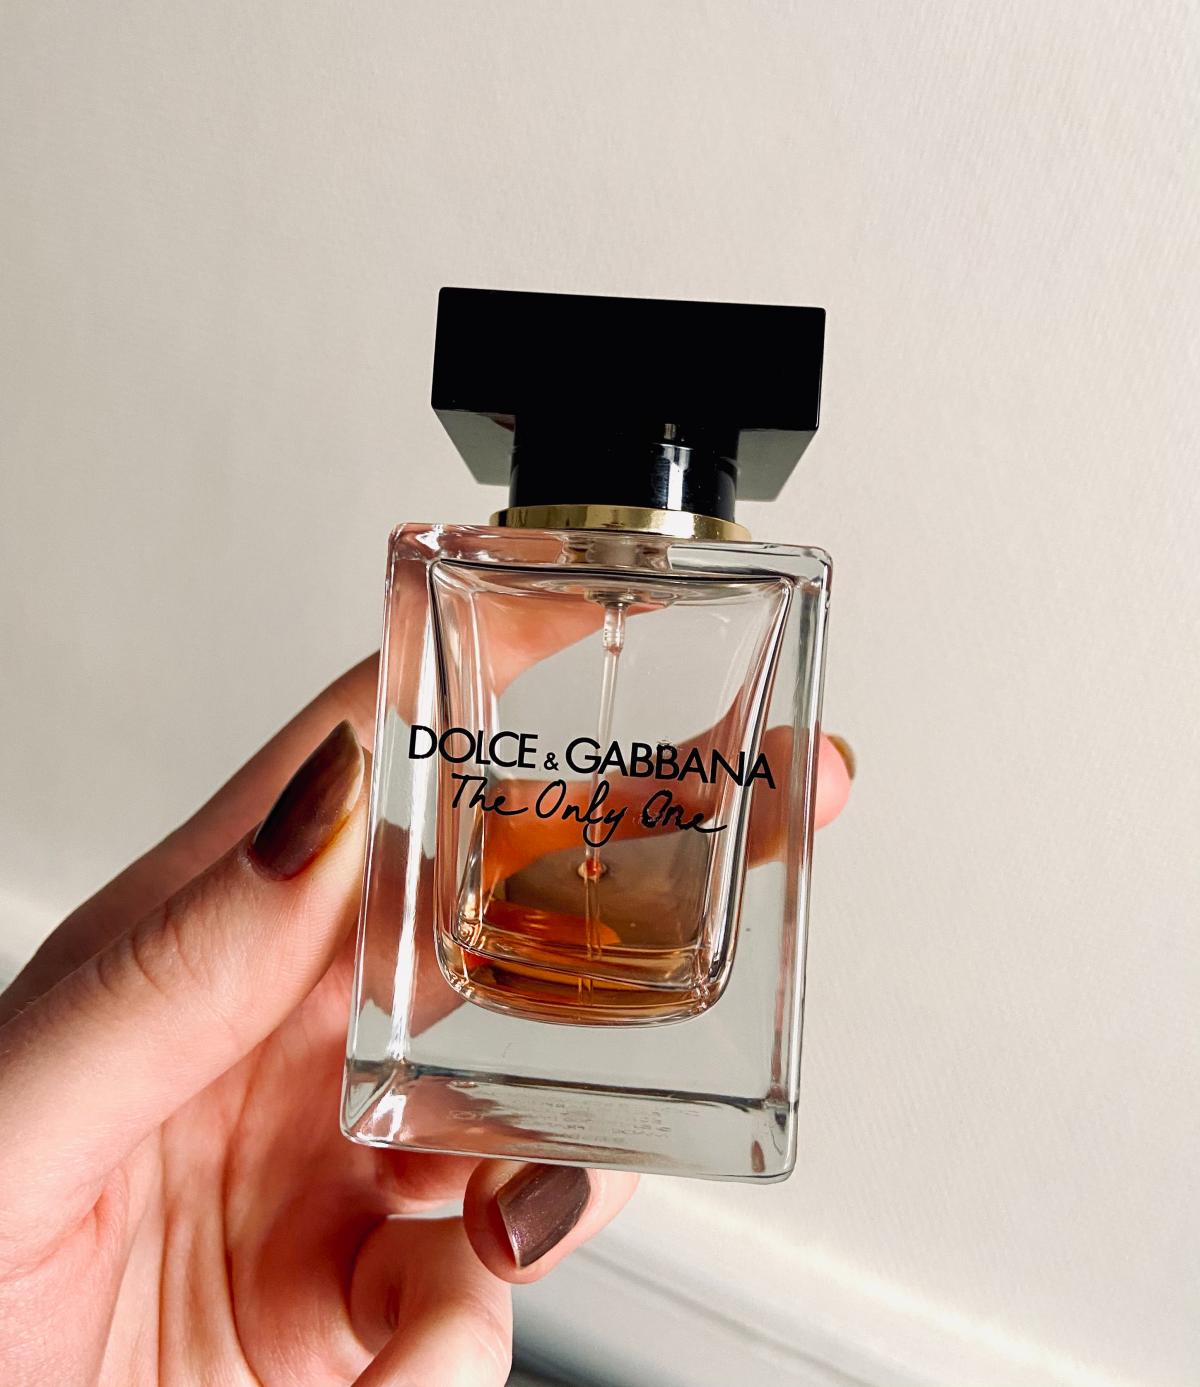 The Only One Dolce&Gabbana perfume - a fragrance for women 2018